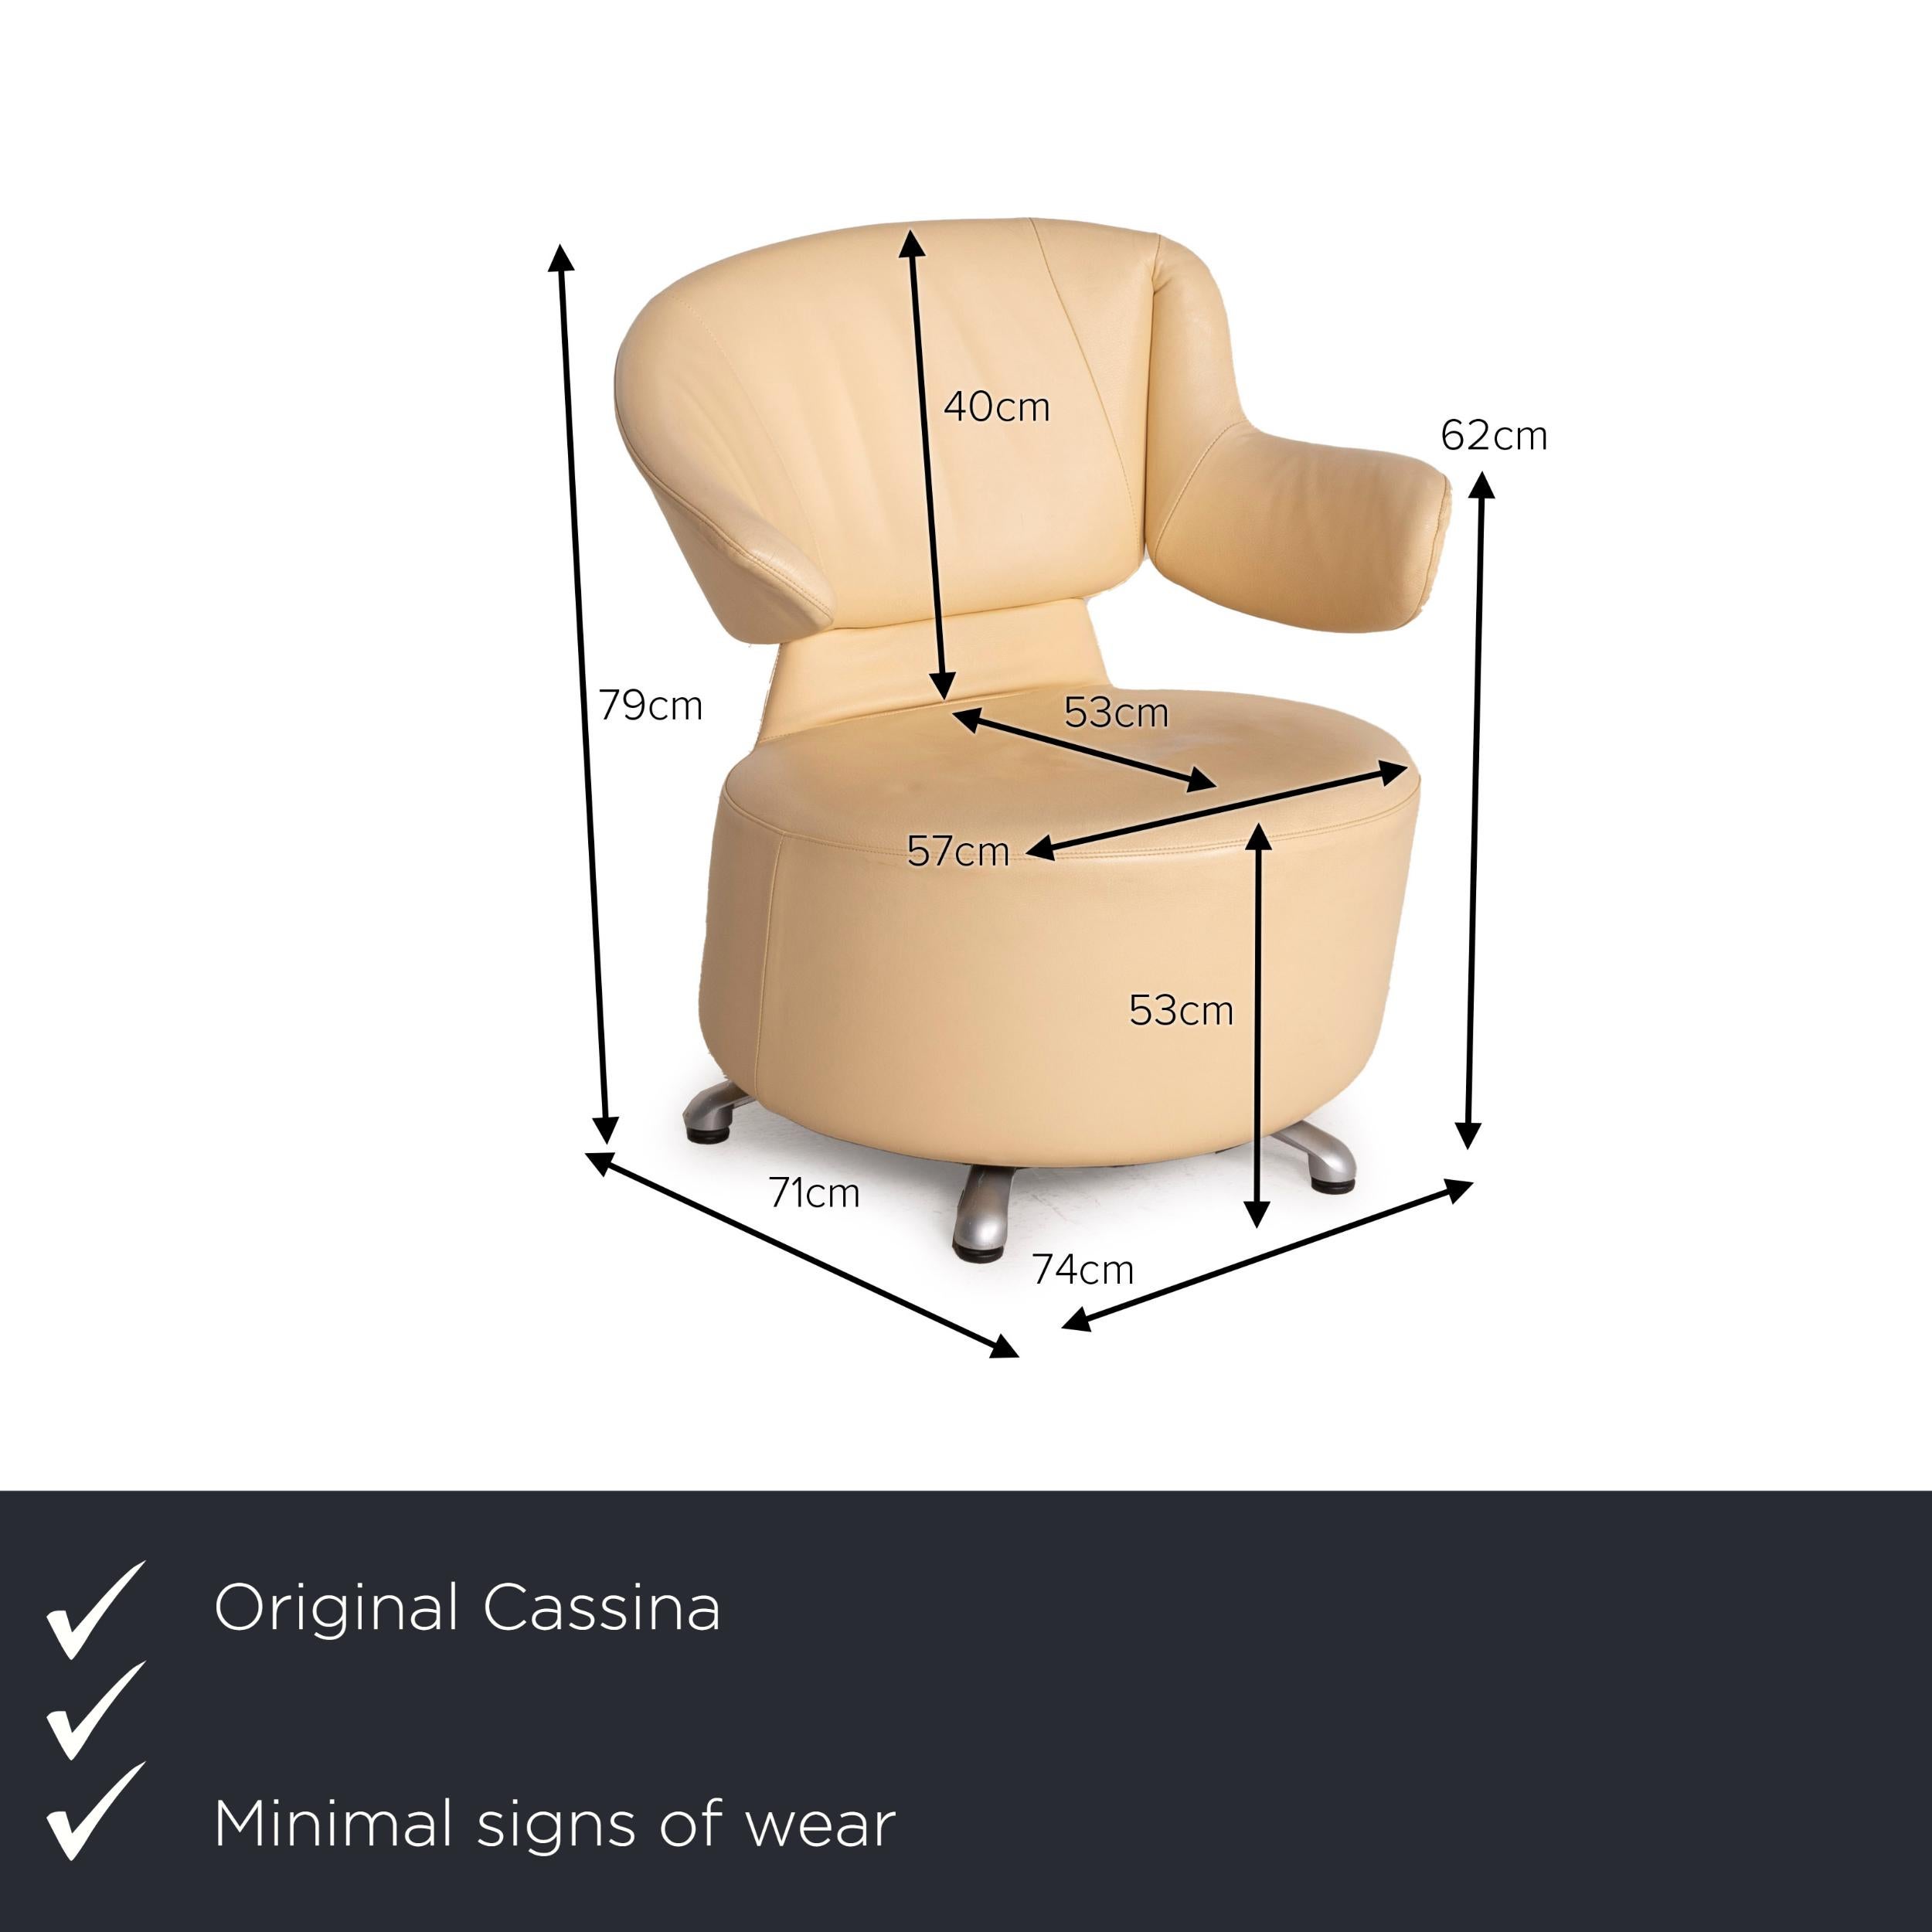 We present to you a Cassina K06 Aki Biki Canta leather armchair beige.
 

 Product measurements in centimeters:
 

Depth: 71
Width: 74
Height: 79
Seat height: 53
Rest height: 62
Seat depth: 53
Seat width: 57
Back height: 40.
 